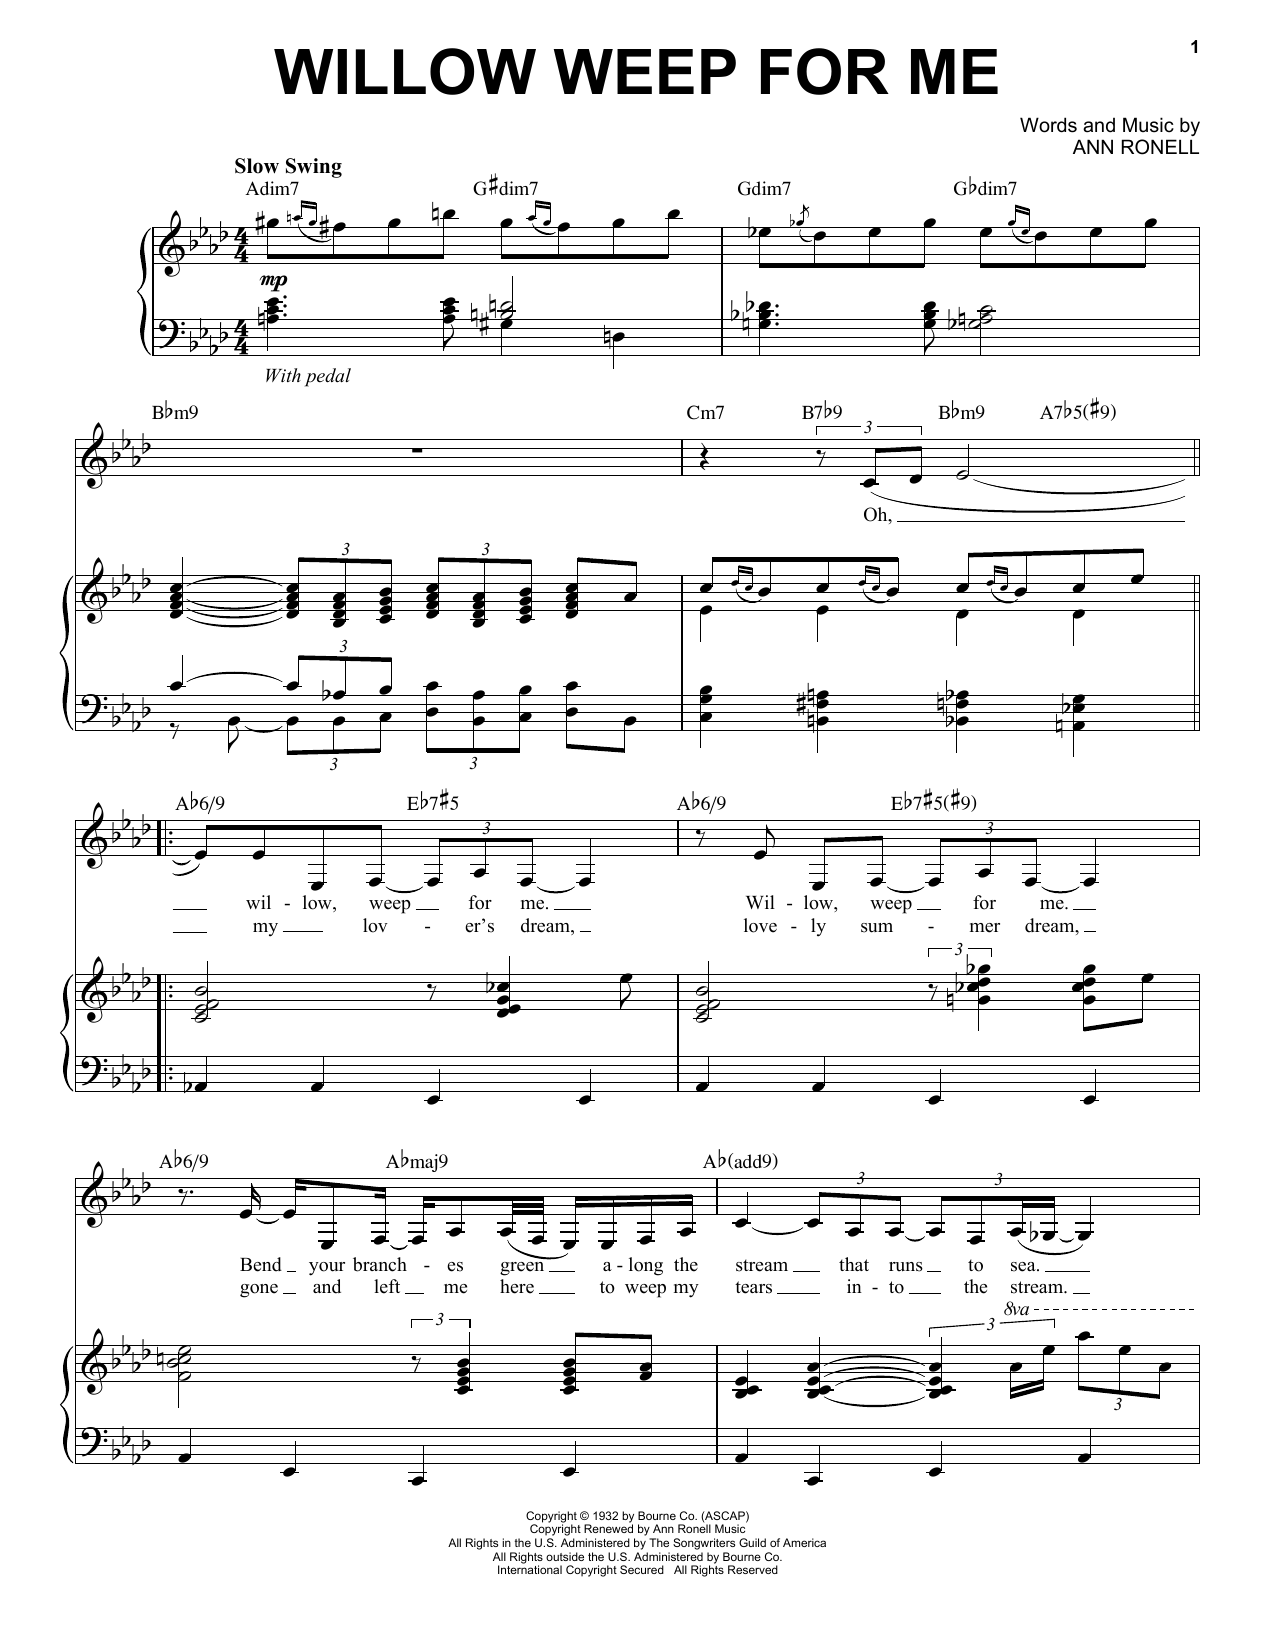 Download Nina Simone Willow Weep For Me Sheet Music